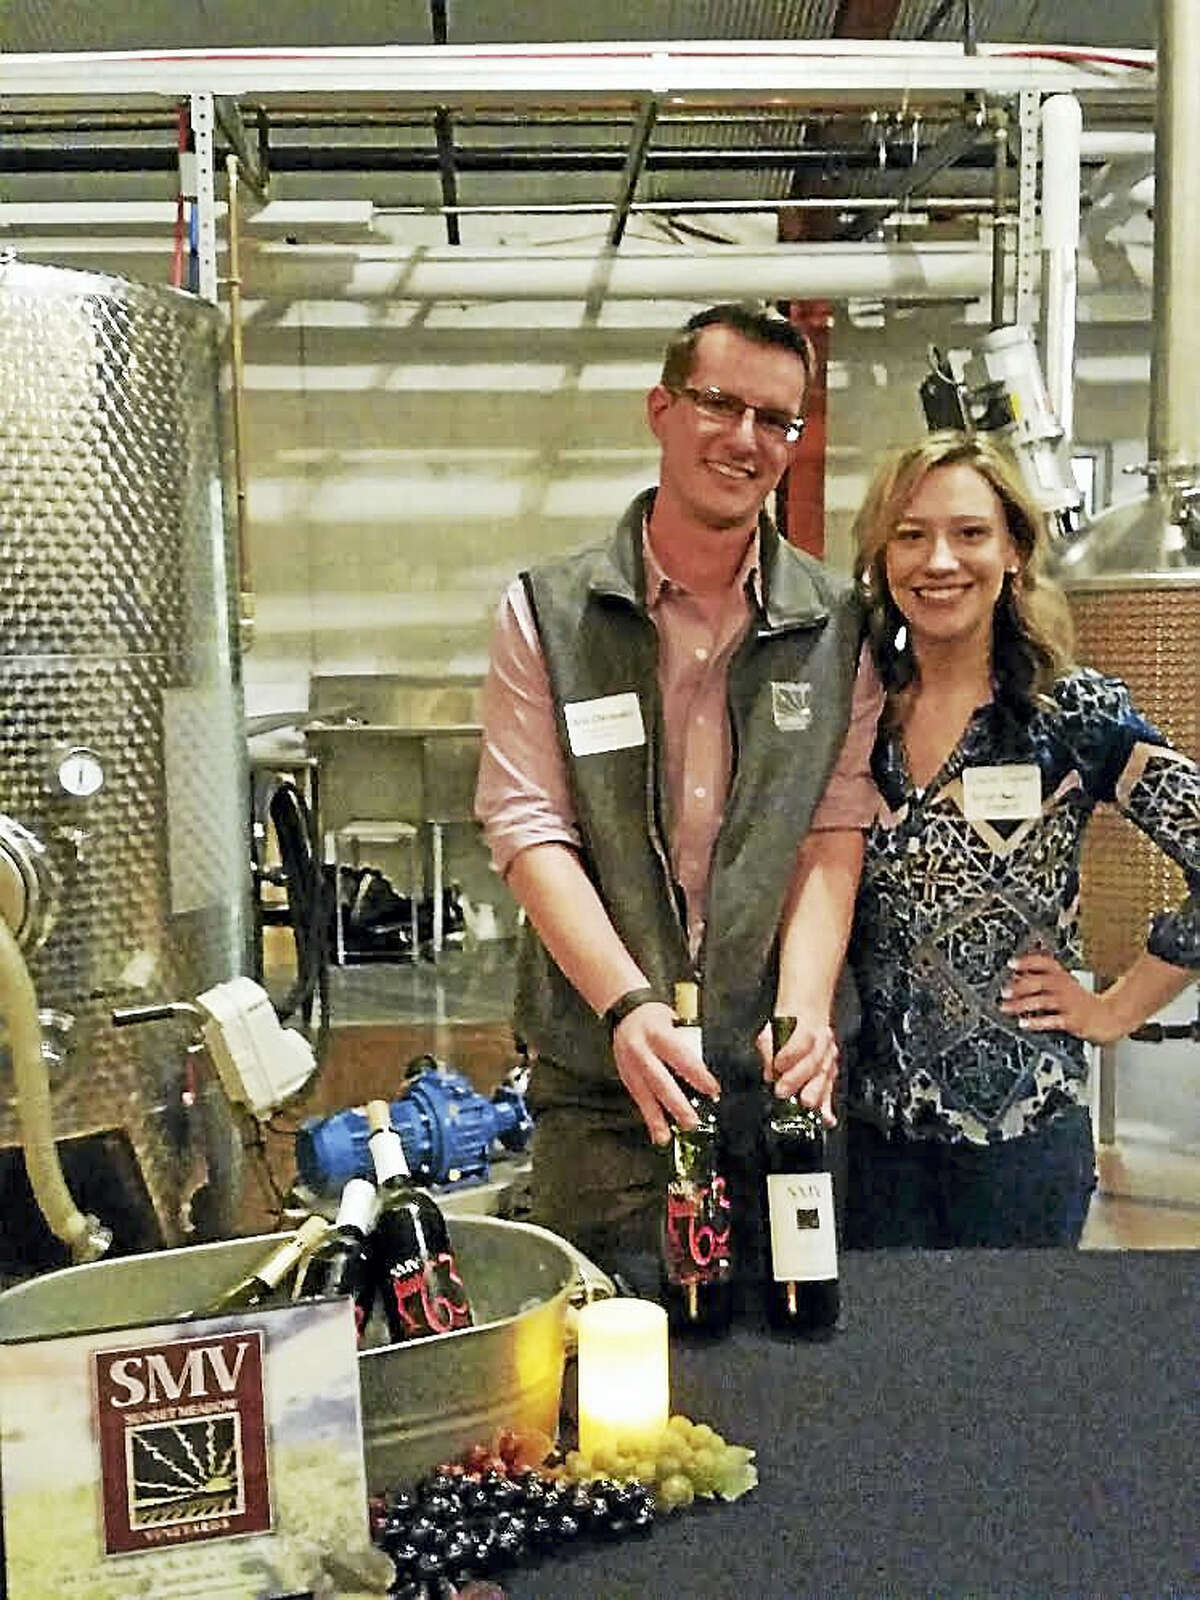 Christopher Chichester and Emilia Jaguera of Sunset Meadow Vineyards of Goshen introduced about 100 visitors to their vintages at culture blog Unlocking Litchfield’s “First Birthday” party at Litchfield Distillery ,at 569 Bantam Rd., in Litchfield on Saturday evening. Activities included speeches from Ross as well as the 2003-season “American Idol” contestant Kimberley Locke and etiquette lecturer Karen Thomas of Torrington. Photo by Noel Ambery